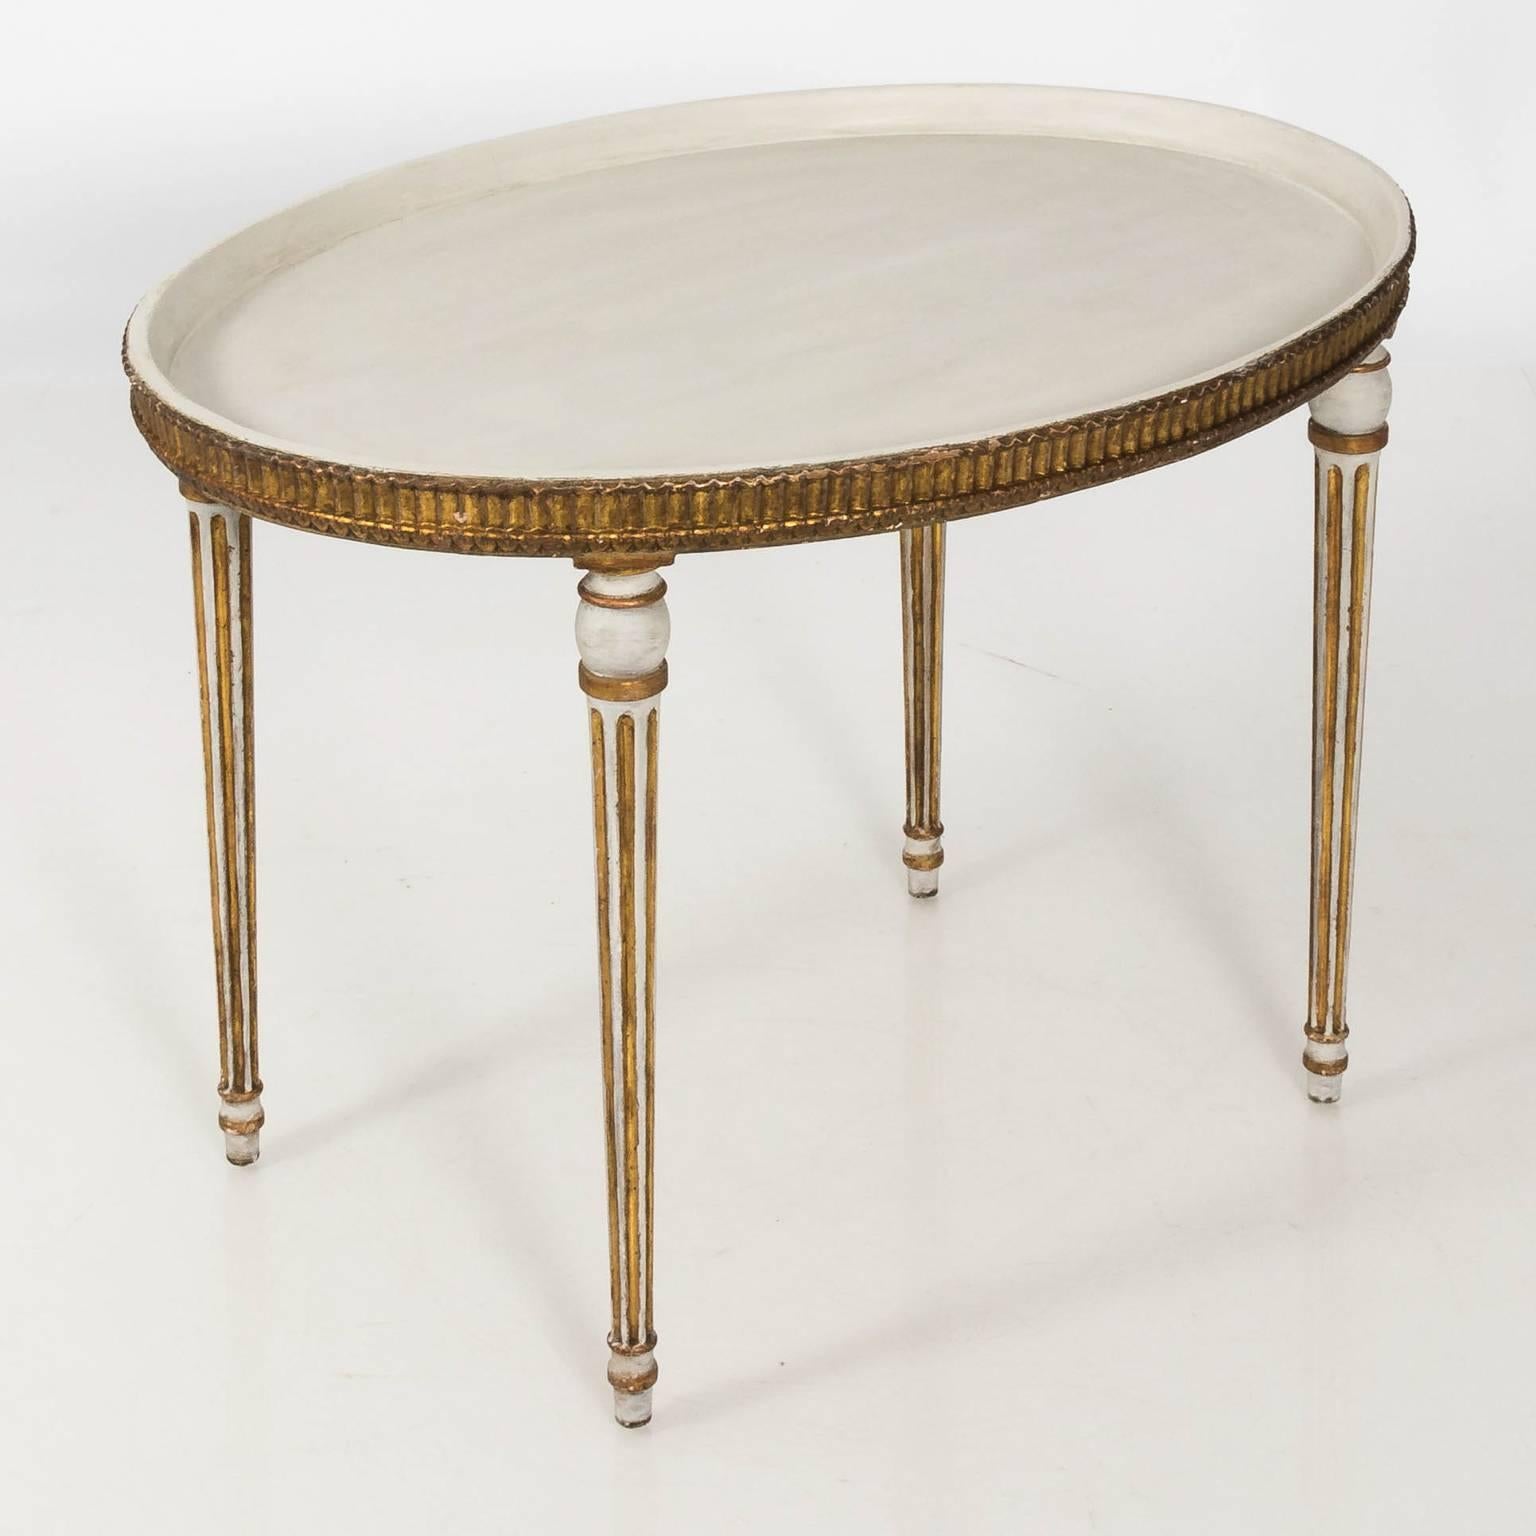 19th Century Neoclassical Oval Center Table 2